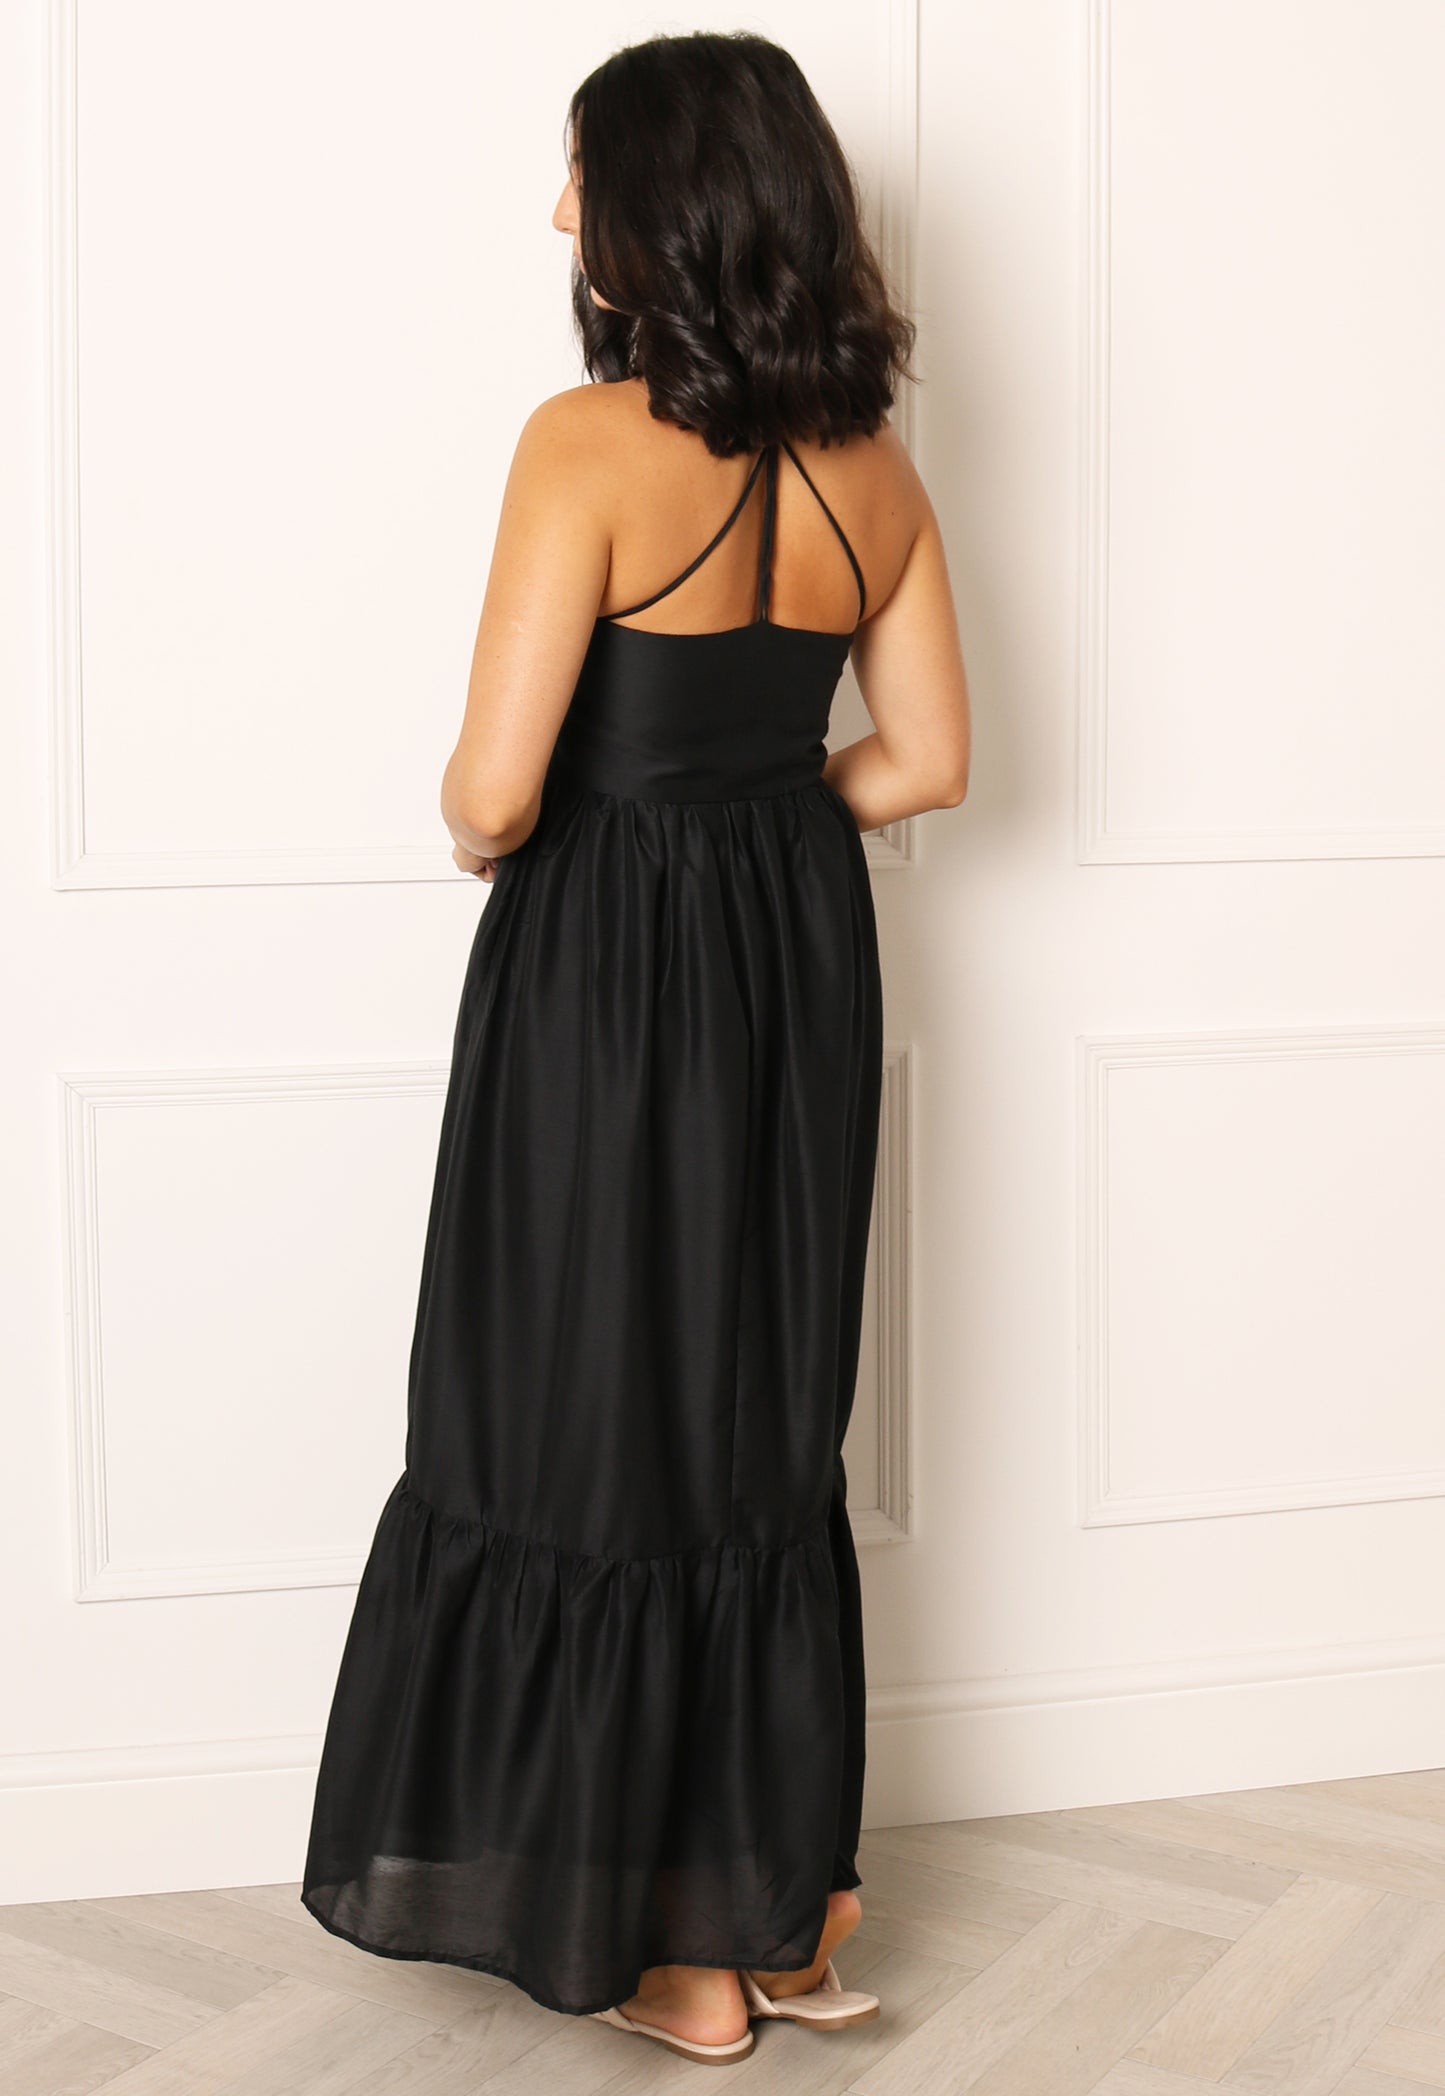 ONLY Monika Strappy Back Floaty Maxi Dress in Black - One Nation Clothing